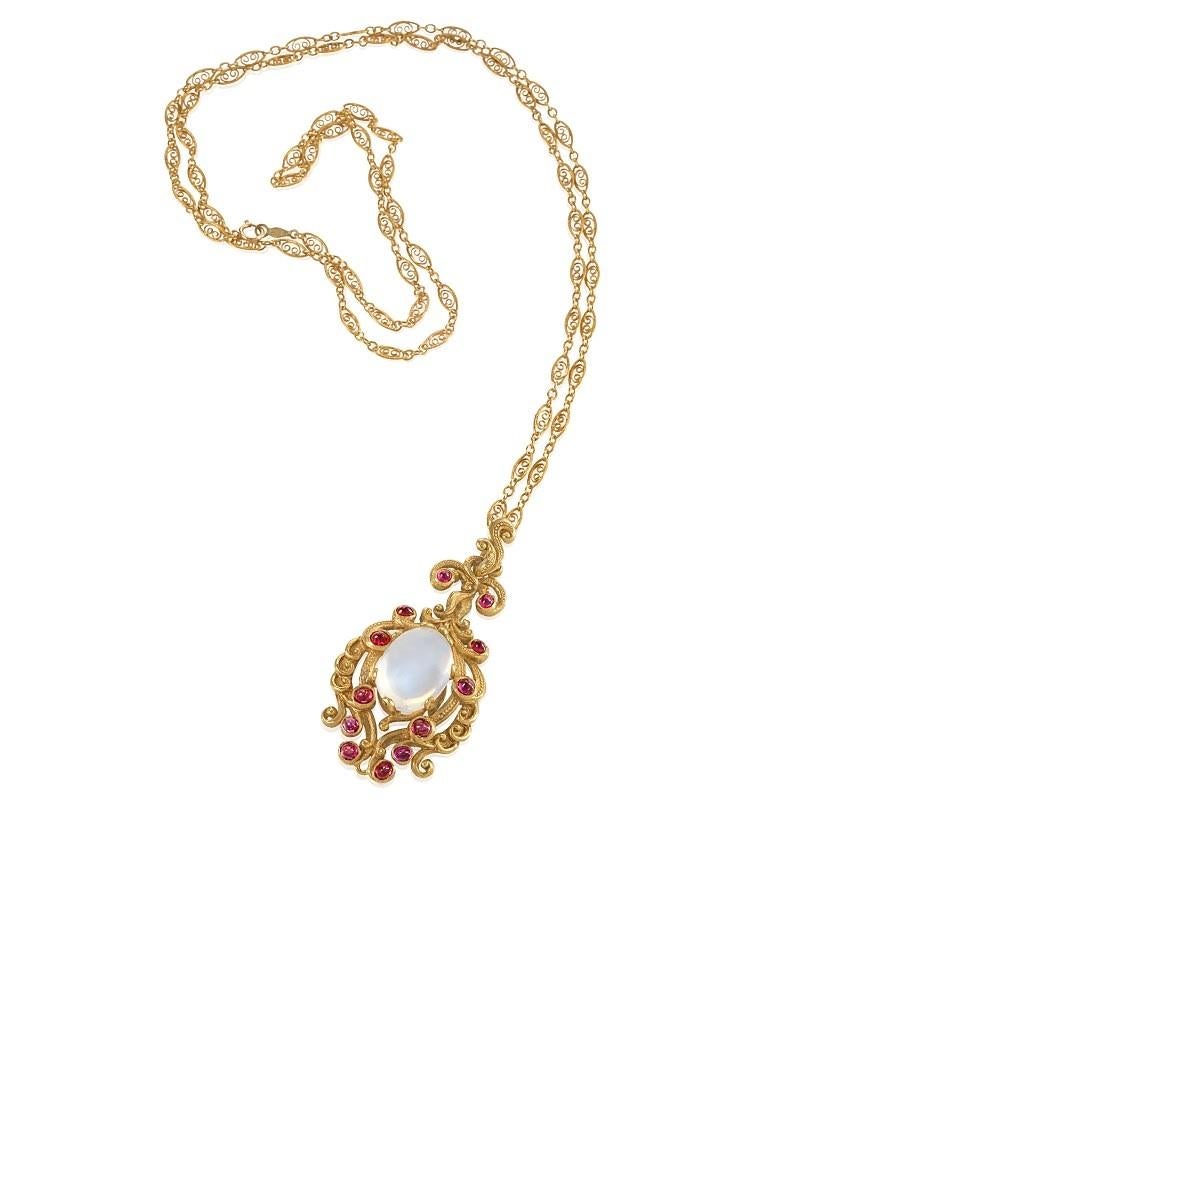 An American late-19th Century 14 karat gold pendant with moonstone and rubies. The pendant has a cabochon moonstone with an approximate total weight of 14.30 carats, and 12 cabochon rubies with an approximate total weight of 1.20 carats. With 14